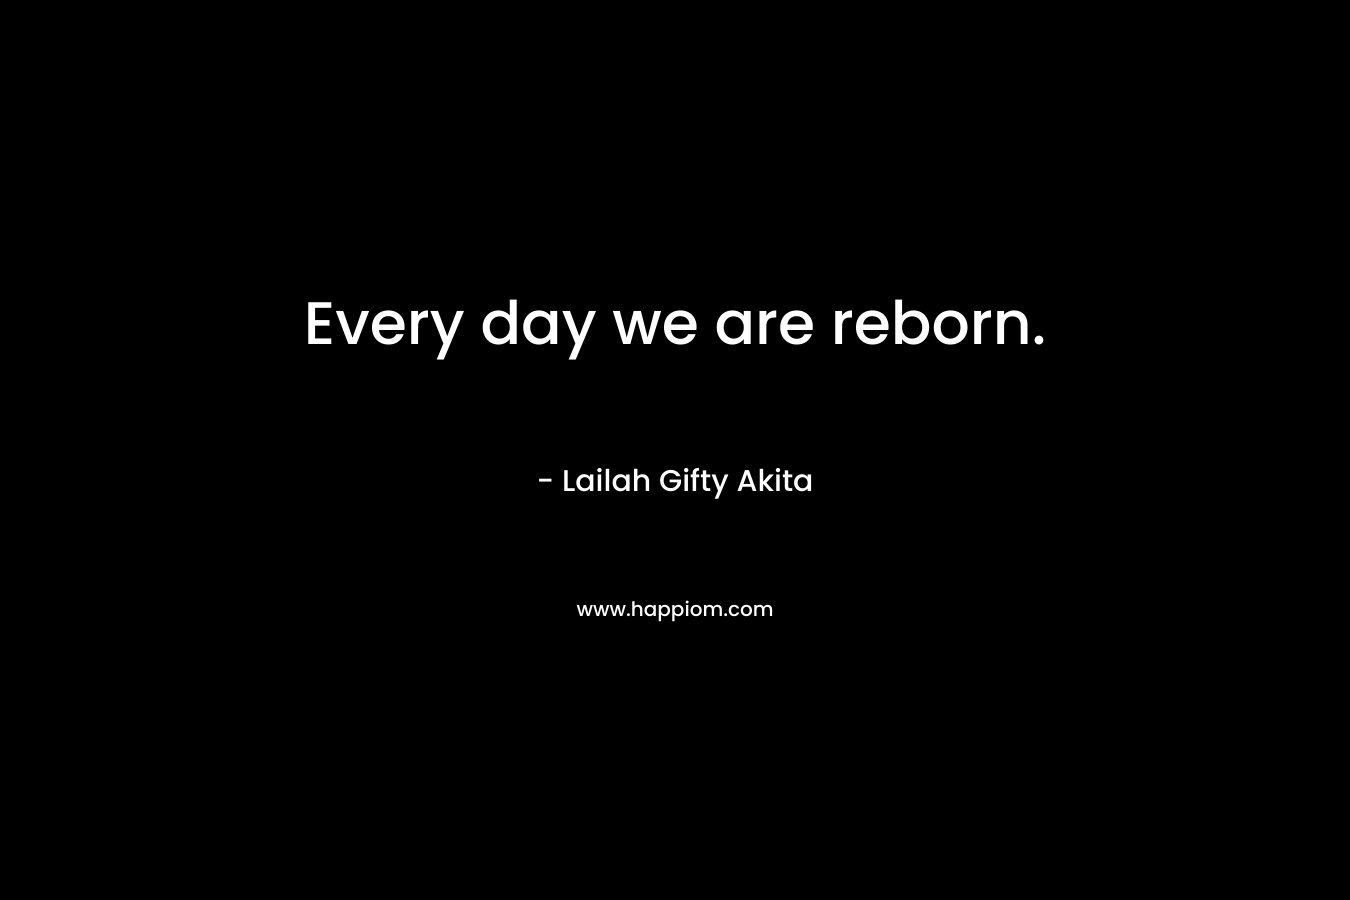 Every day we are reborn.